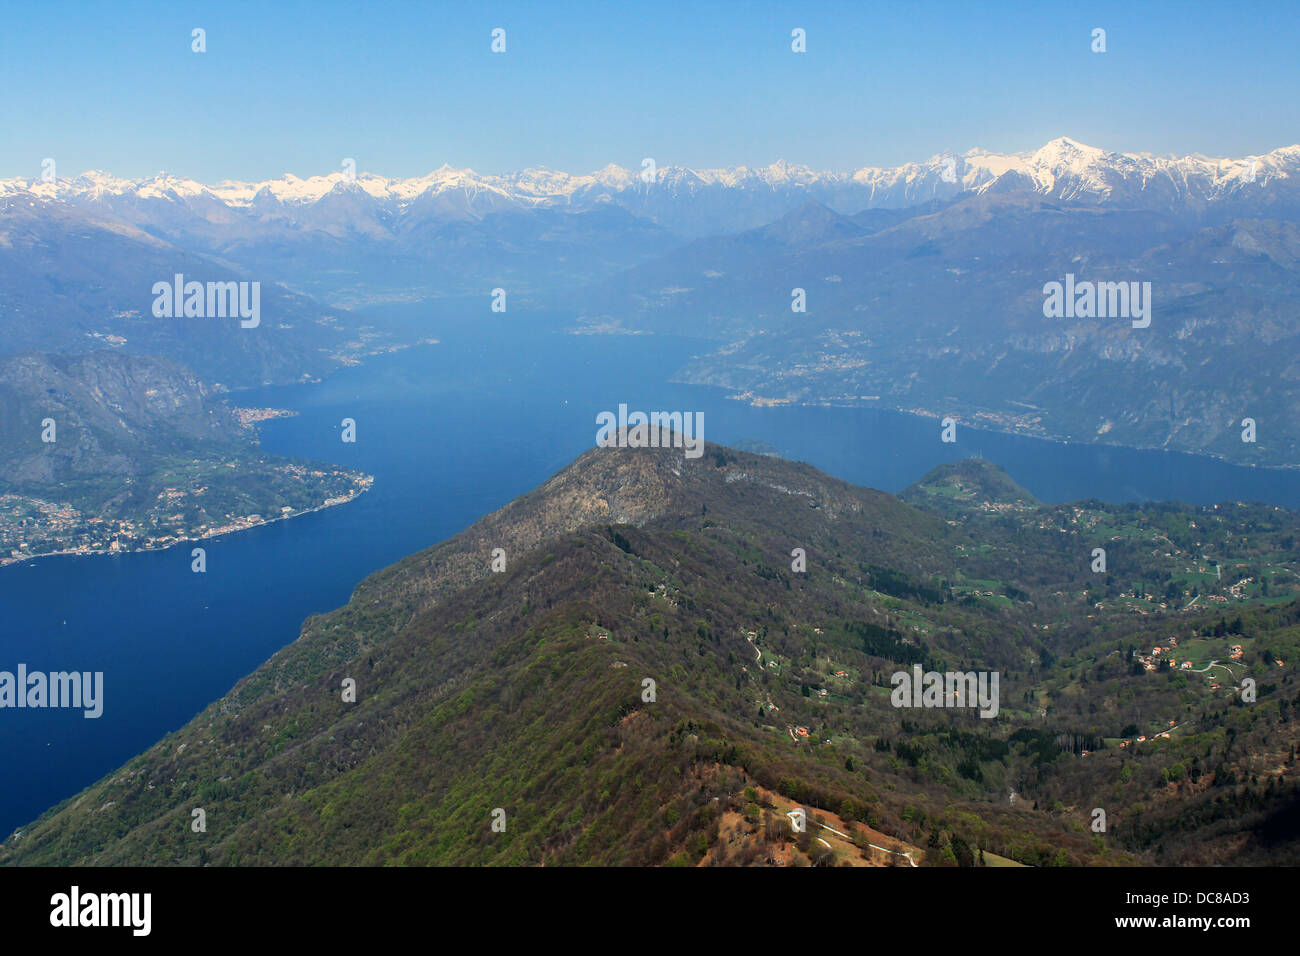 Typical Y shape of the Como lake in Italy Stock Photo - Alamy